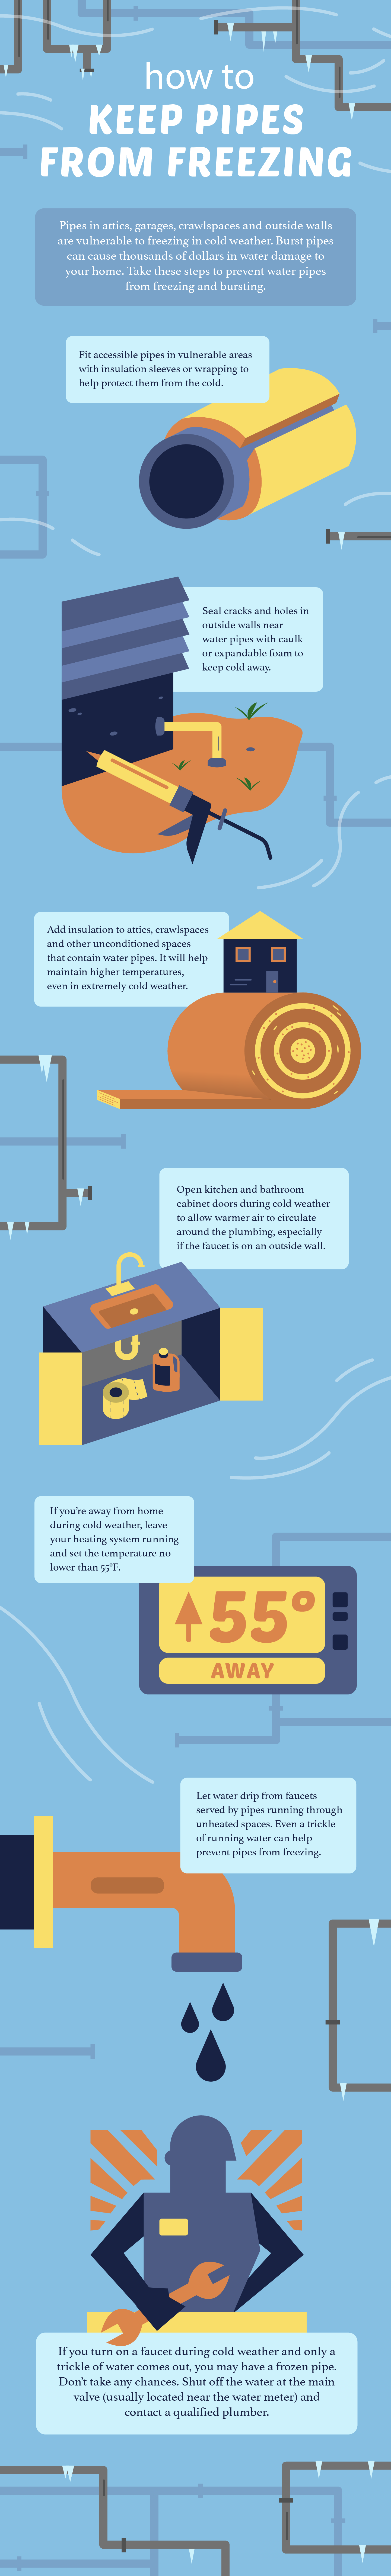 How to Keep Pipes From Freezing Infographic